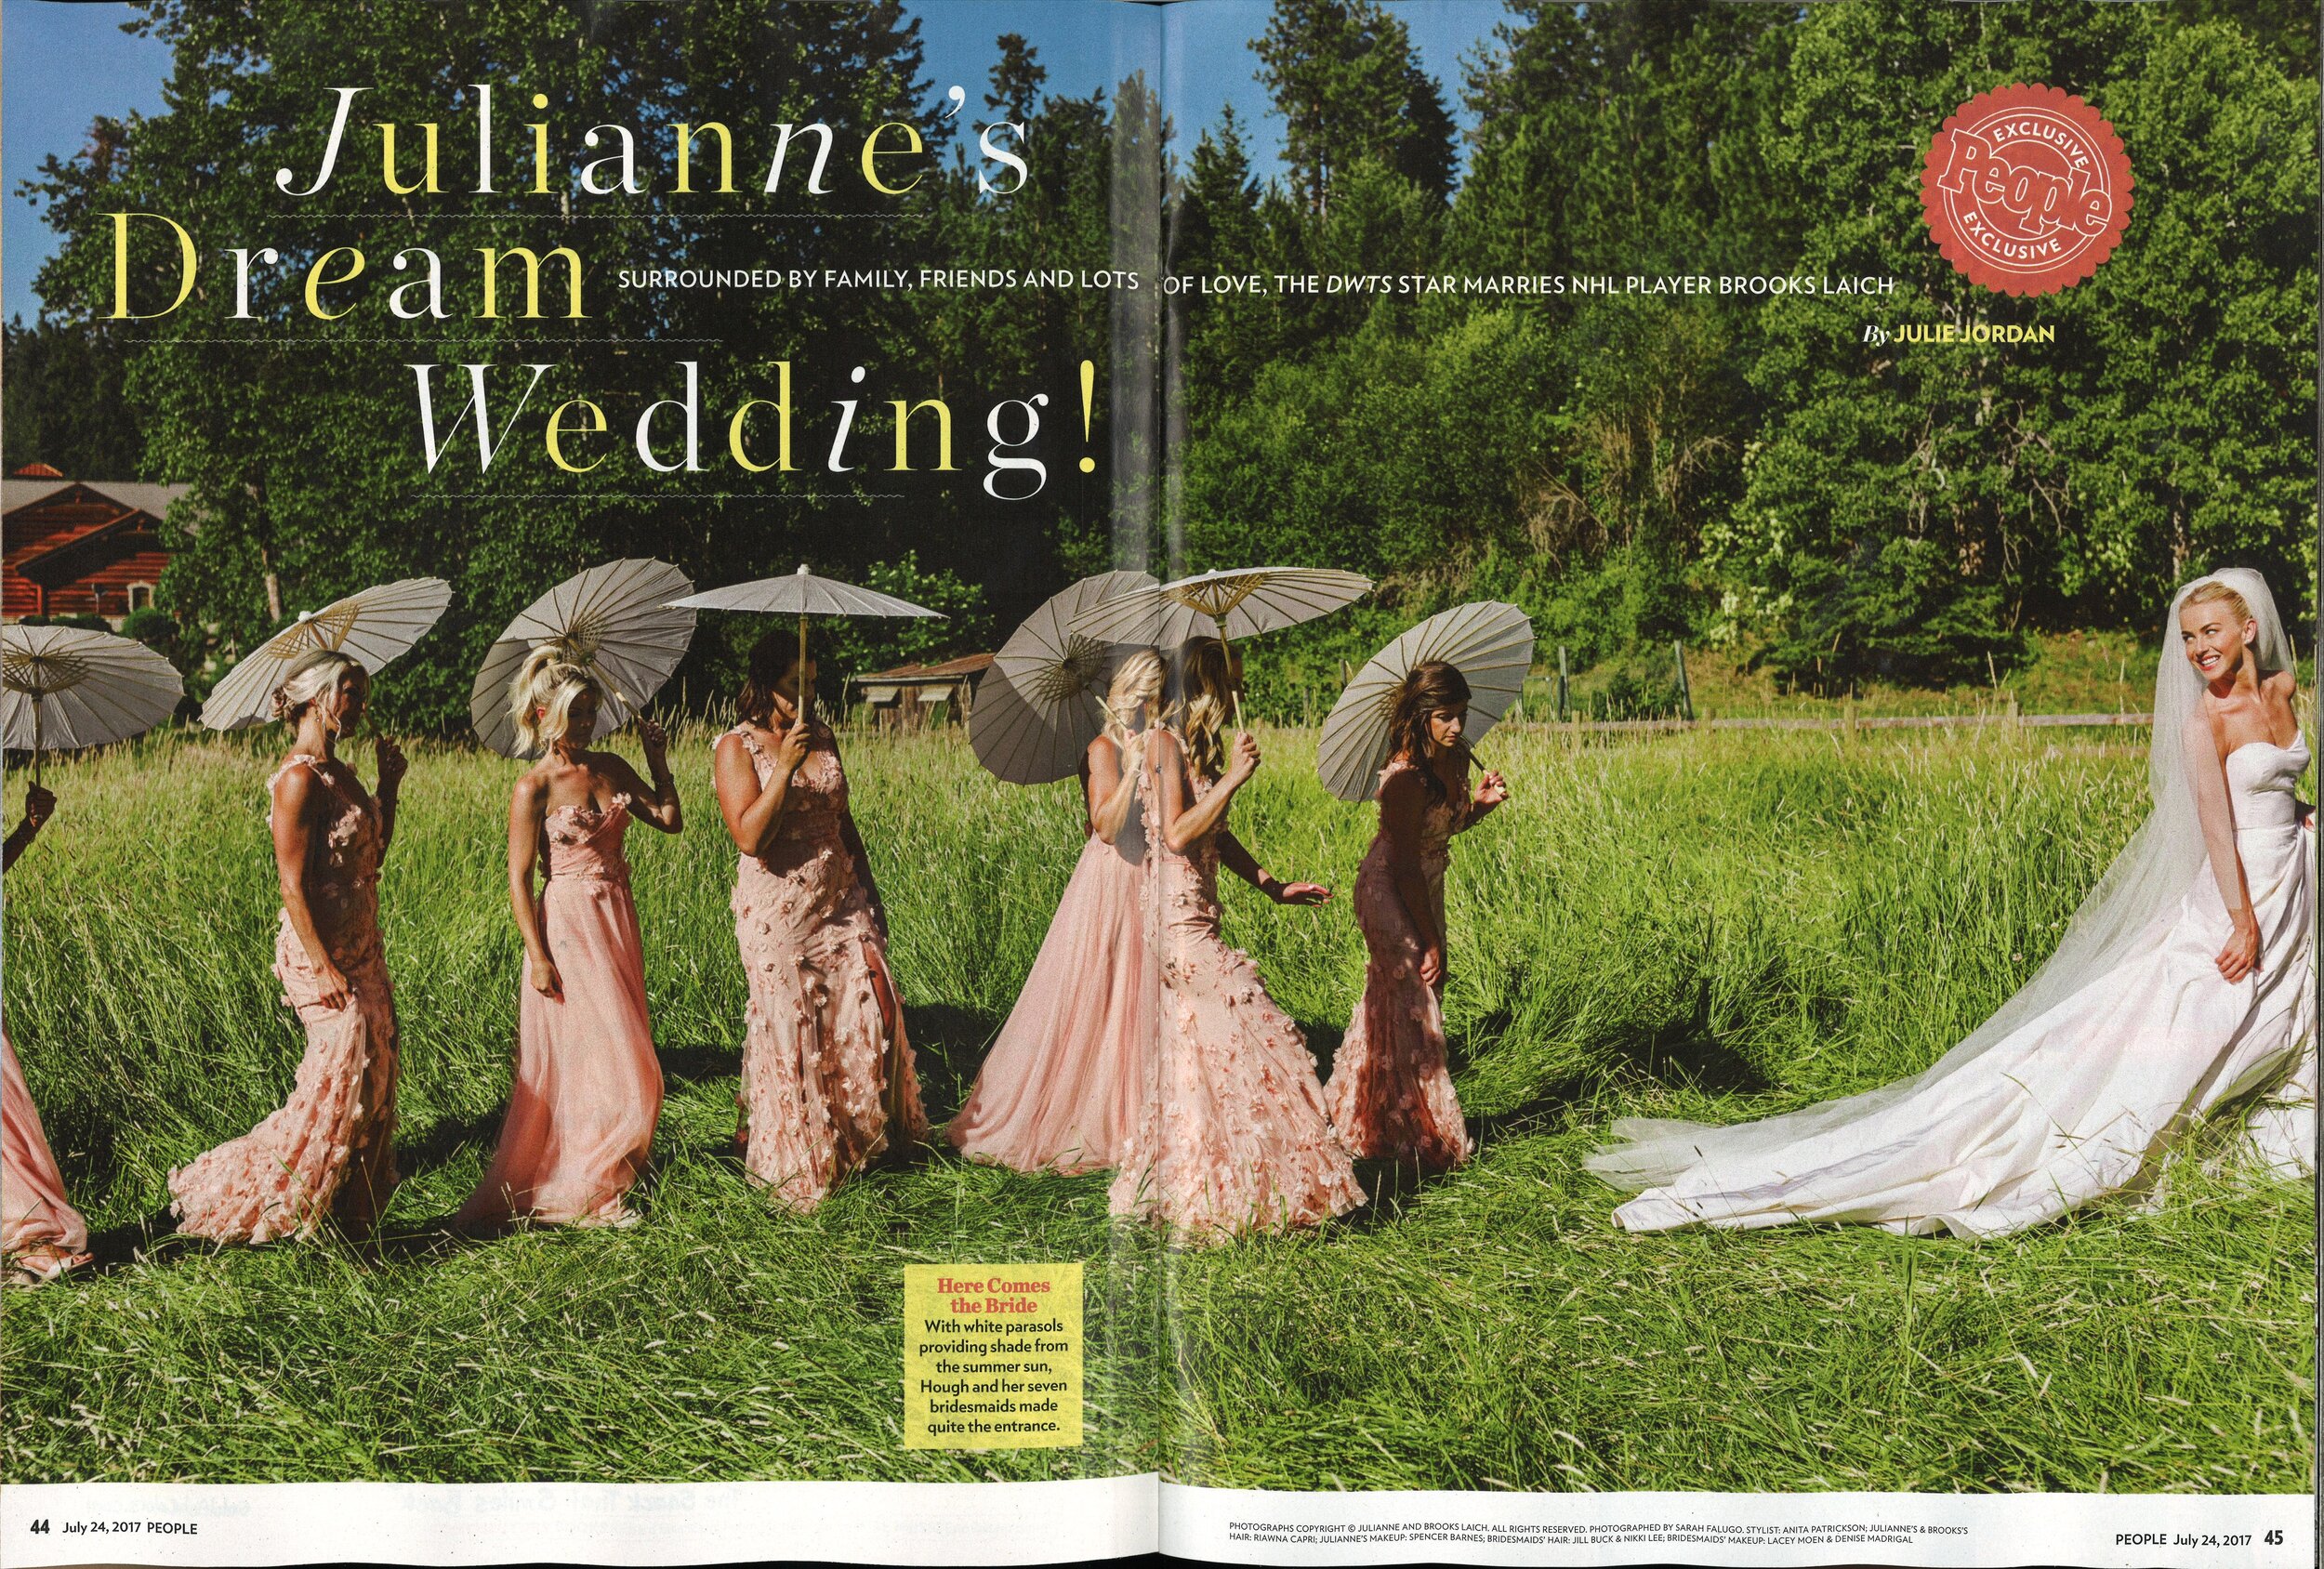   Celebrity Julianne Hough Chooses Marchesa Notte For Her Bridesmaids’ Dresses, Covered In People Magazine  